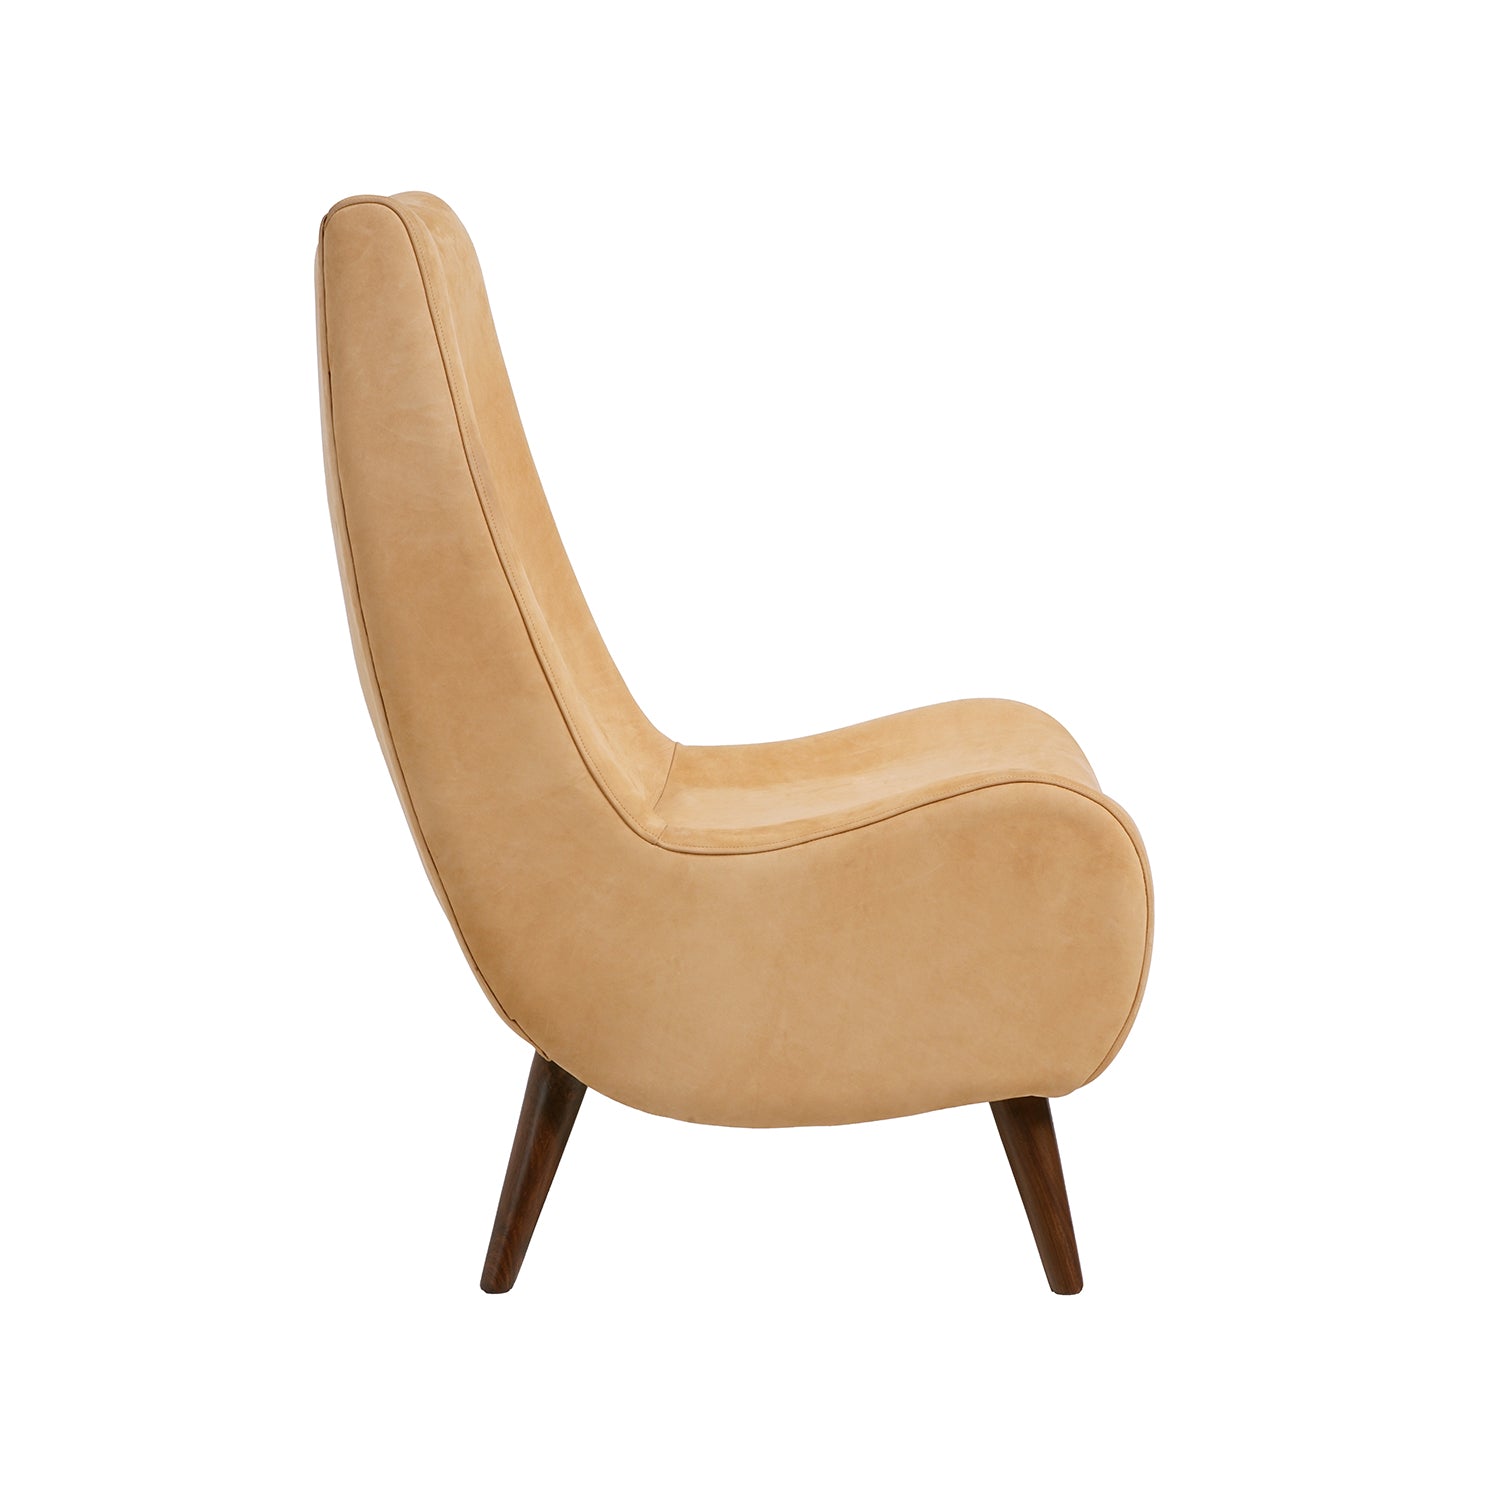 McKeen Nubuck Leather Chair Camel Side